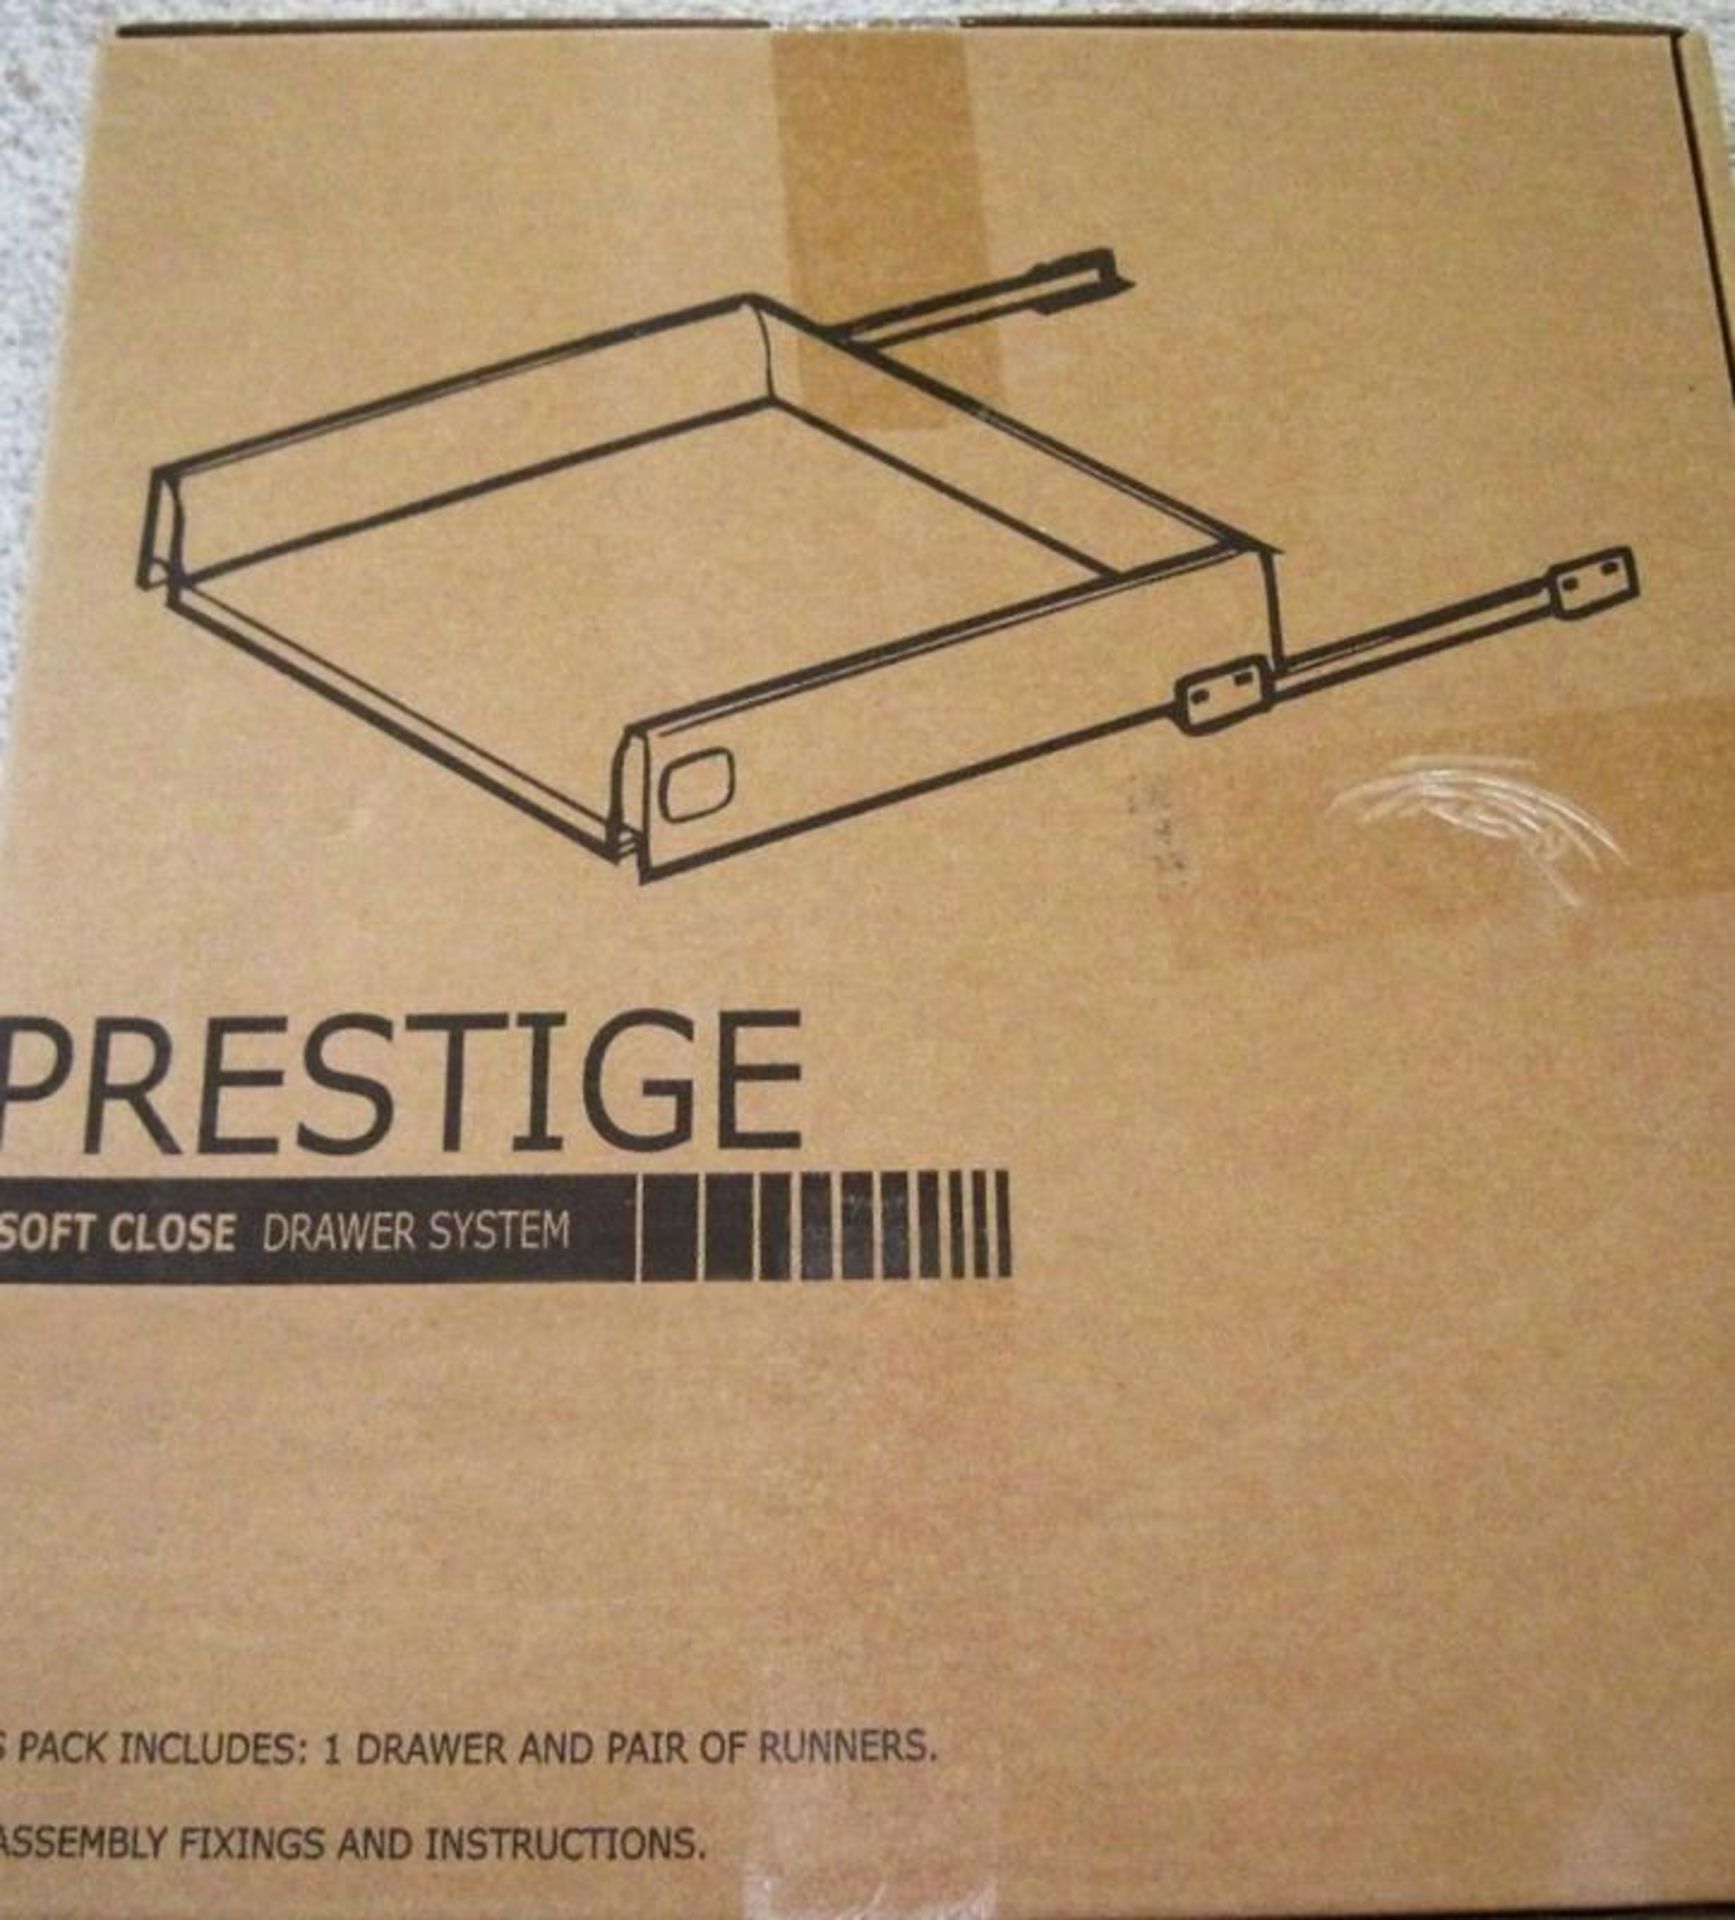 4 x 800mm Soft Close Kitchen Drawer Packs - B&Q Prestige - Brand New Stock - Features Include - Image 2 of 2